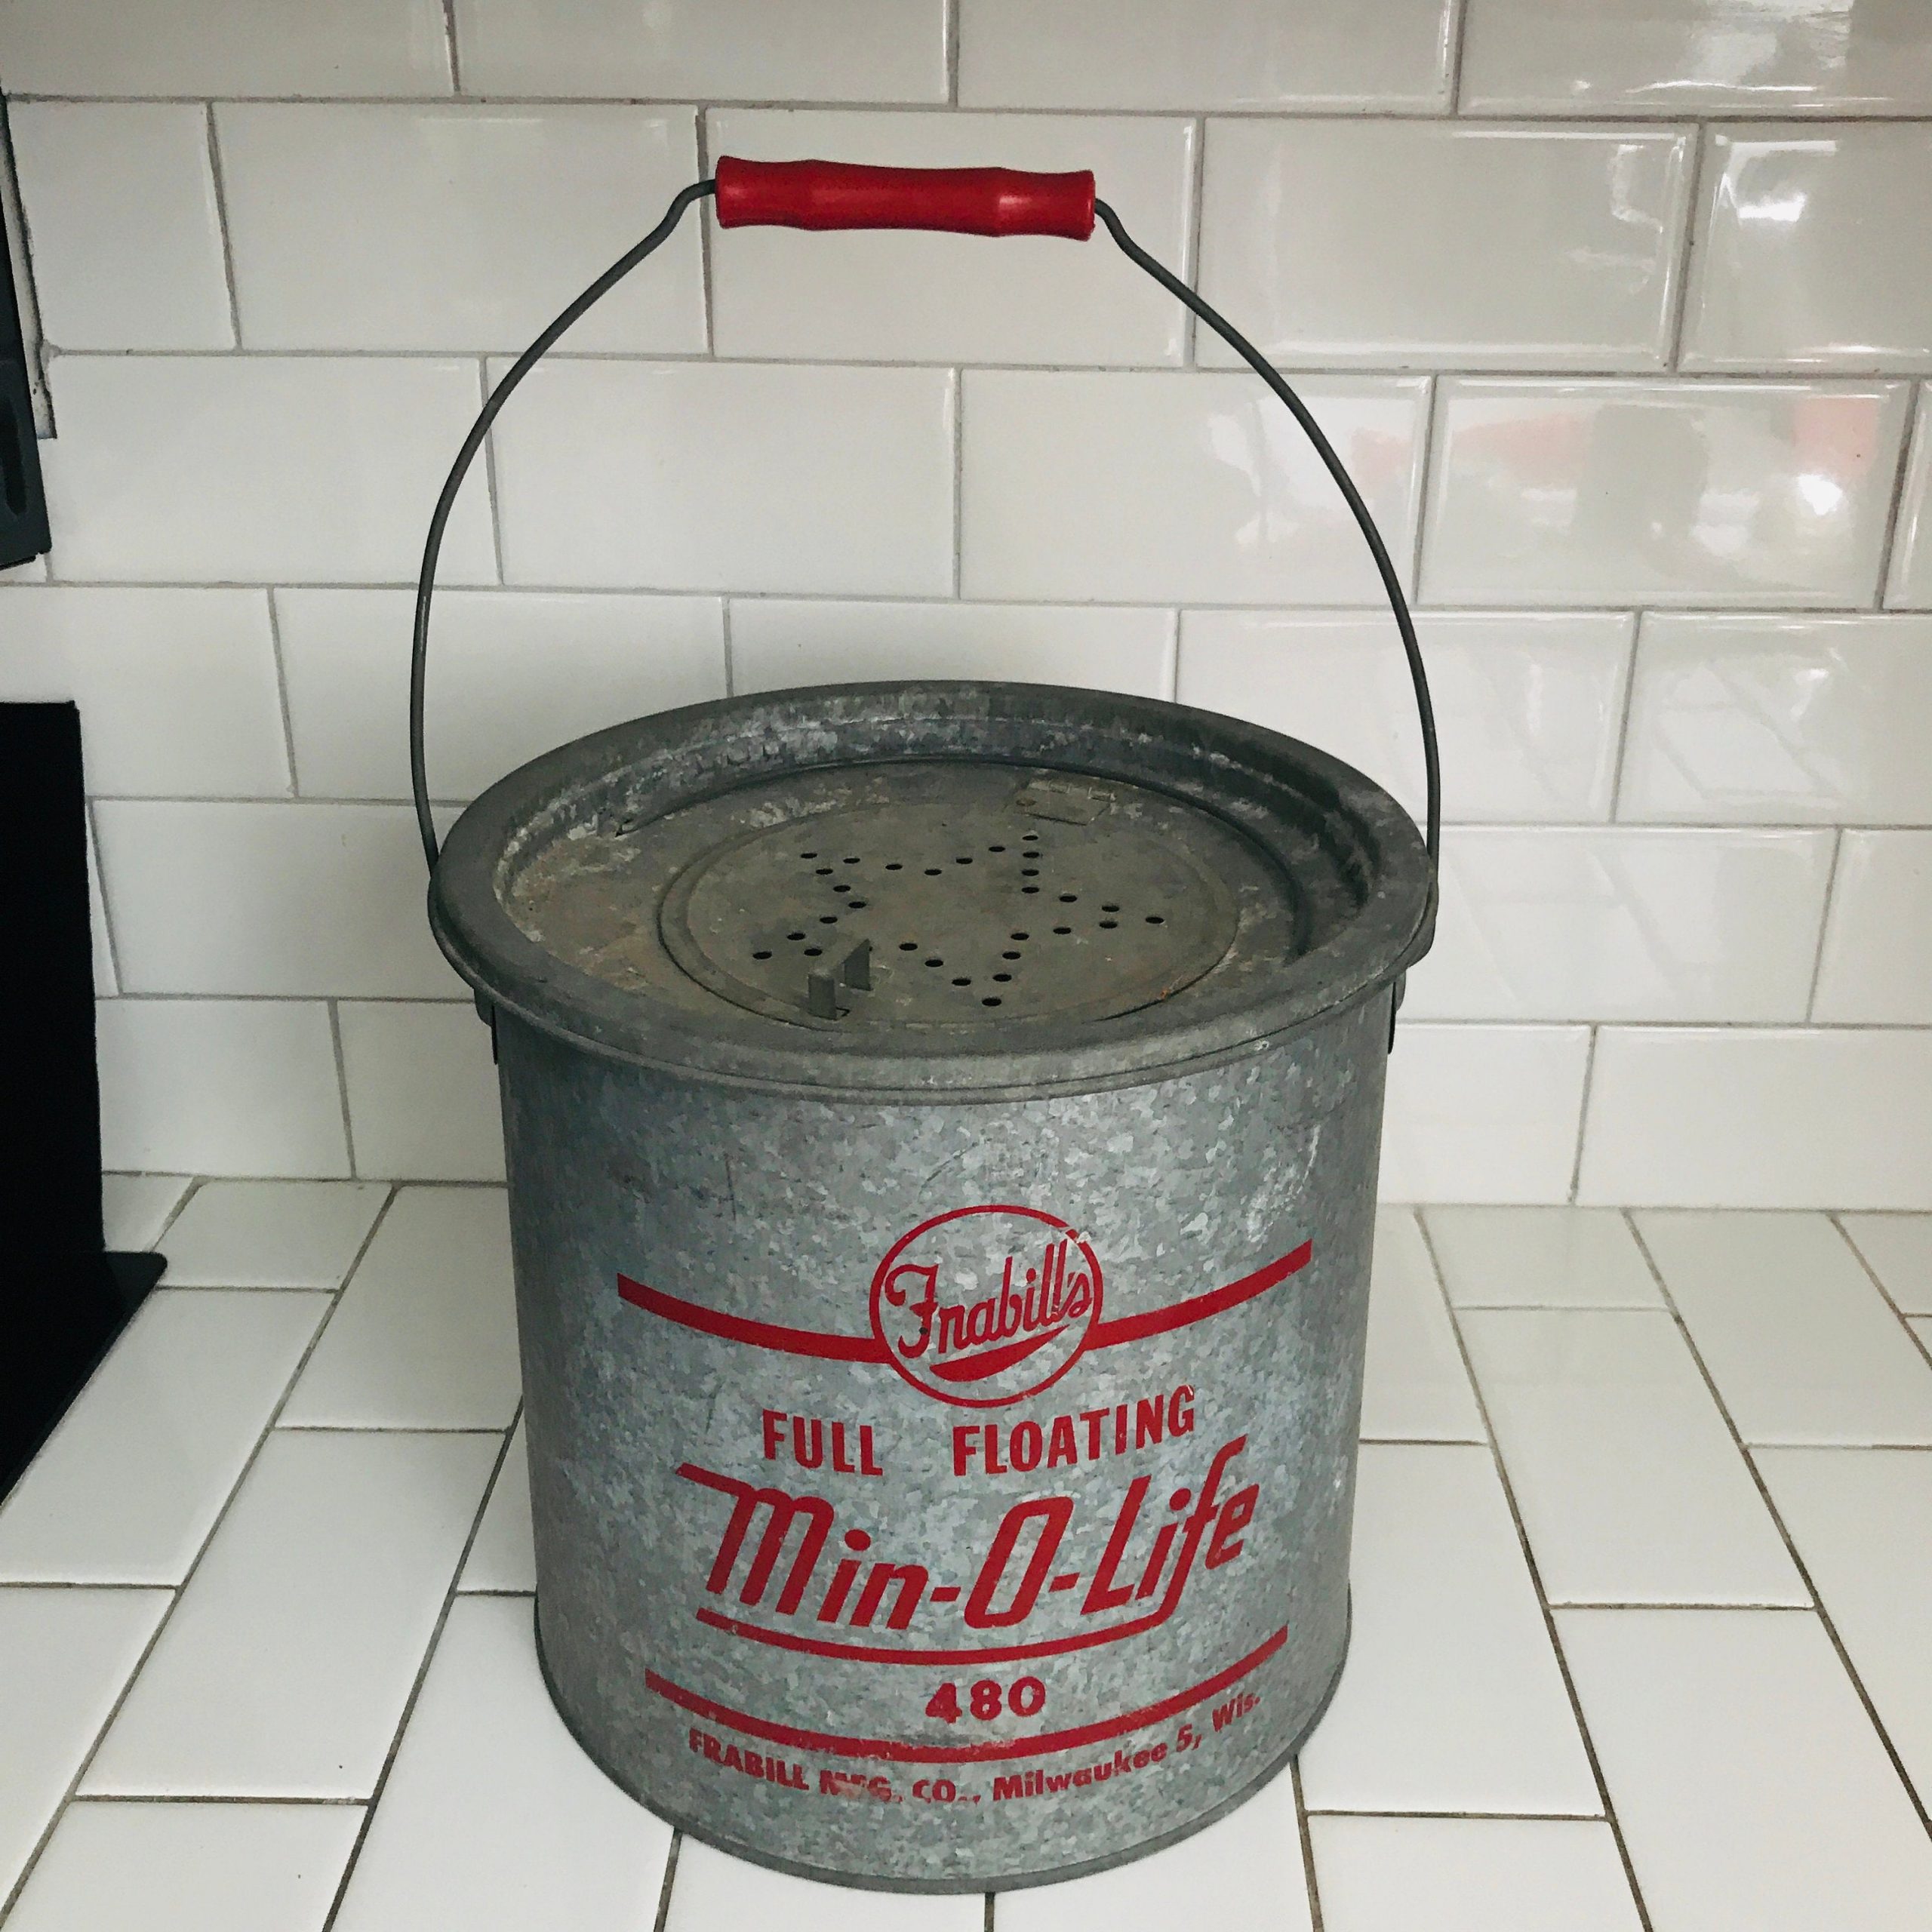 Vintage Minnow bucket galavanized metal red print Min-o-life full florating  Frabill's great condition fishing camping lodge farmhouse decor